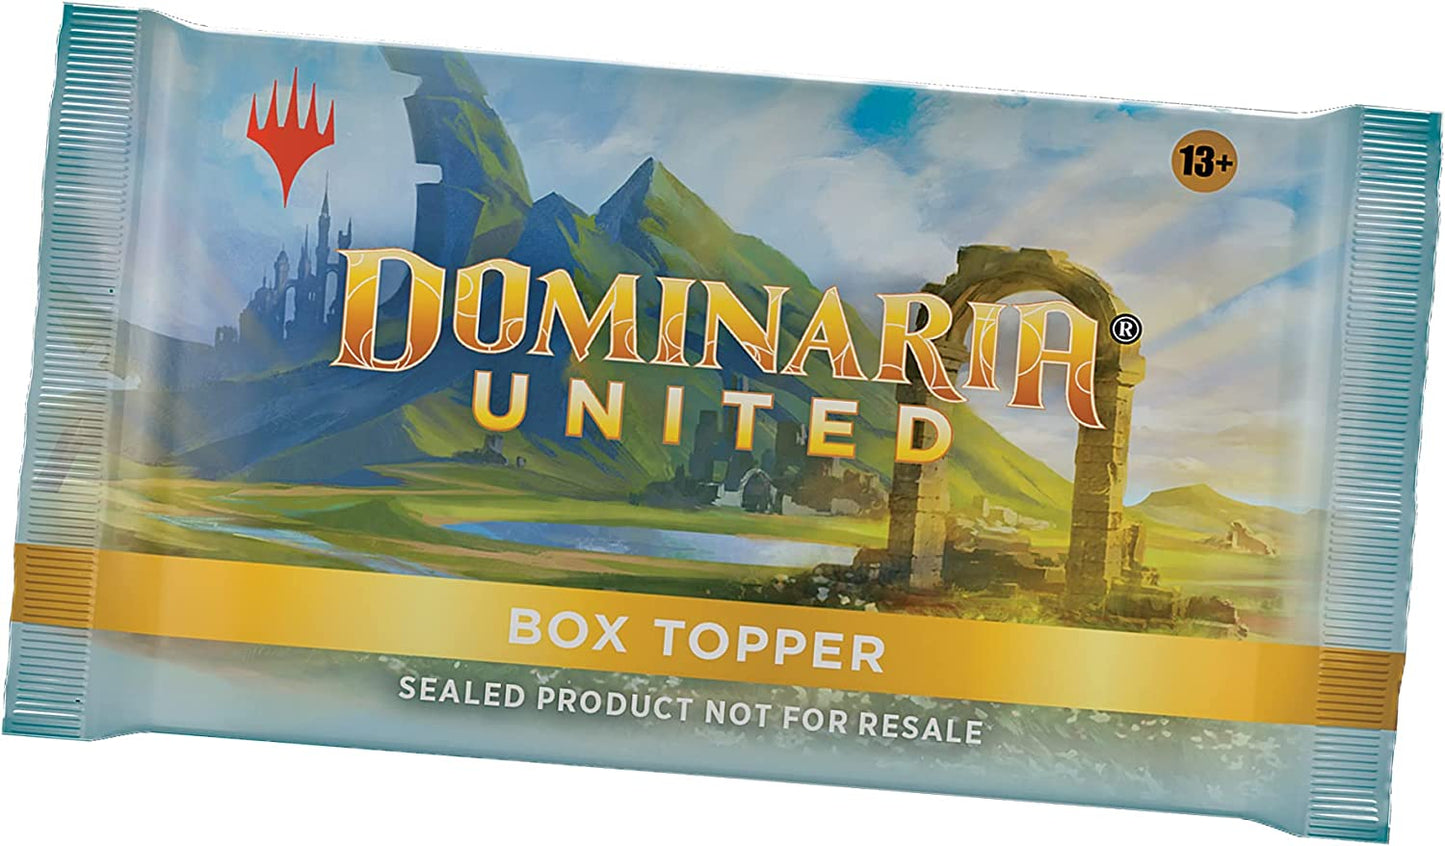 Magic: The Gathering Set Booster Box Case - Dominaria United (Case of 6)